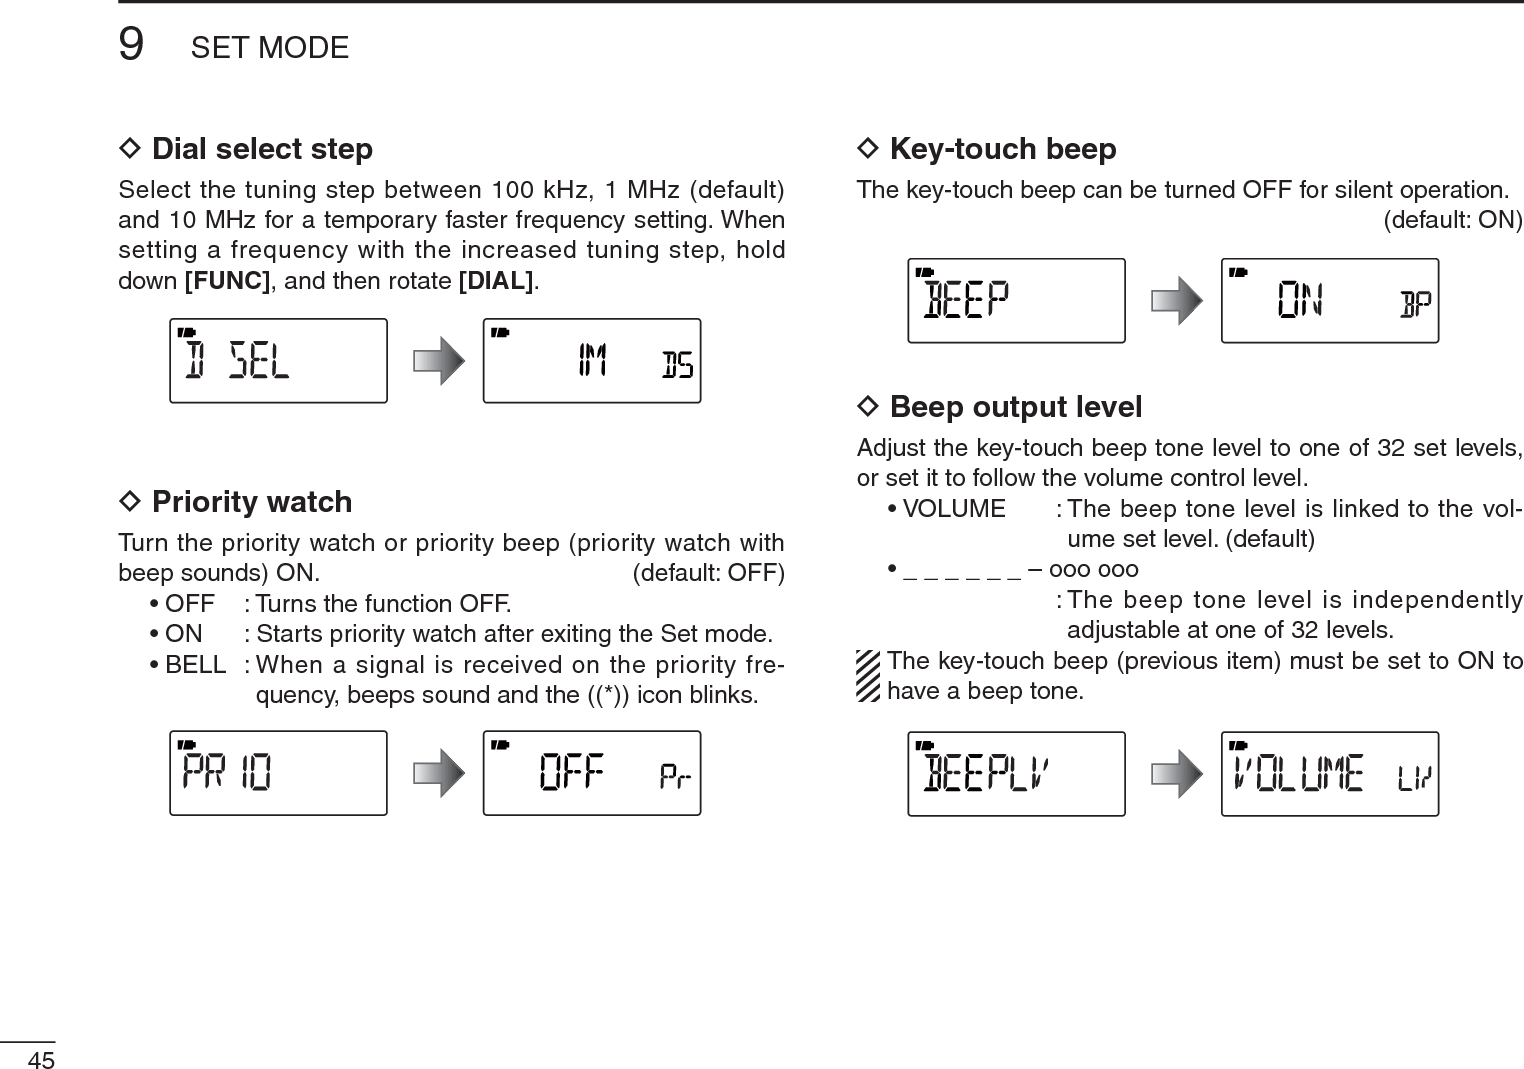 459SET MODED Dial select stepSelect the tuning step between 100 kHz, 1 MHz (default) and 10 MHz for a temporary faster frequency setting. When setting a frequency with the increased tuning step, hold down [FUNC], and then rotate [DIAL].D Priority watchTurn the priority watch or priority beep (priority watch with beep sounds) ON. (default: OFF)• OFF : Turns the function OFF.• ON : Starts priority watch after exiting the Set mode.• BELL : When a signal is received on the priority fre-quency, beeps sound and the ((*)) icon blinks. D Key-touch beepThe key-touch beep can be turned OFF for silent operation. (default: ON)D Beep output levelAdjust the key-touch beep tone level to one of 32 set levels, or set it to follow the volume control level. • VOLUME : The  beep tone level is linked to the vol-ume set level. (default)• _ _ _ _ _ _ – ooo ooo    : The beep tone level is independently adjustable at one of 32 levels.The key-touch beep (previous item) must be set to ON to have a beep tone.